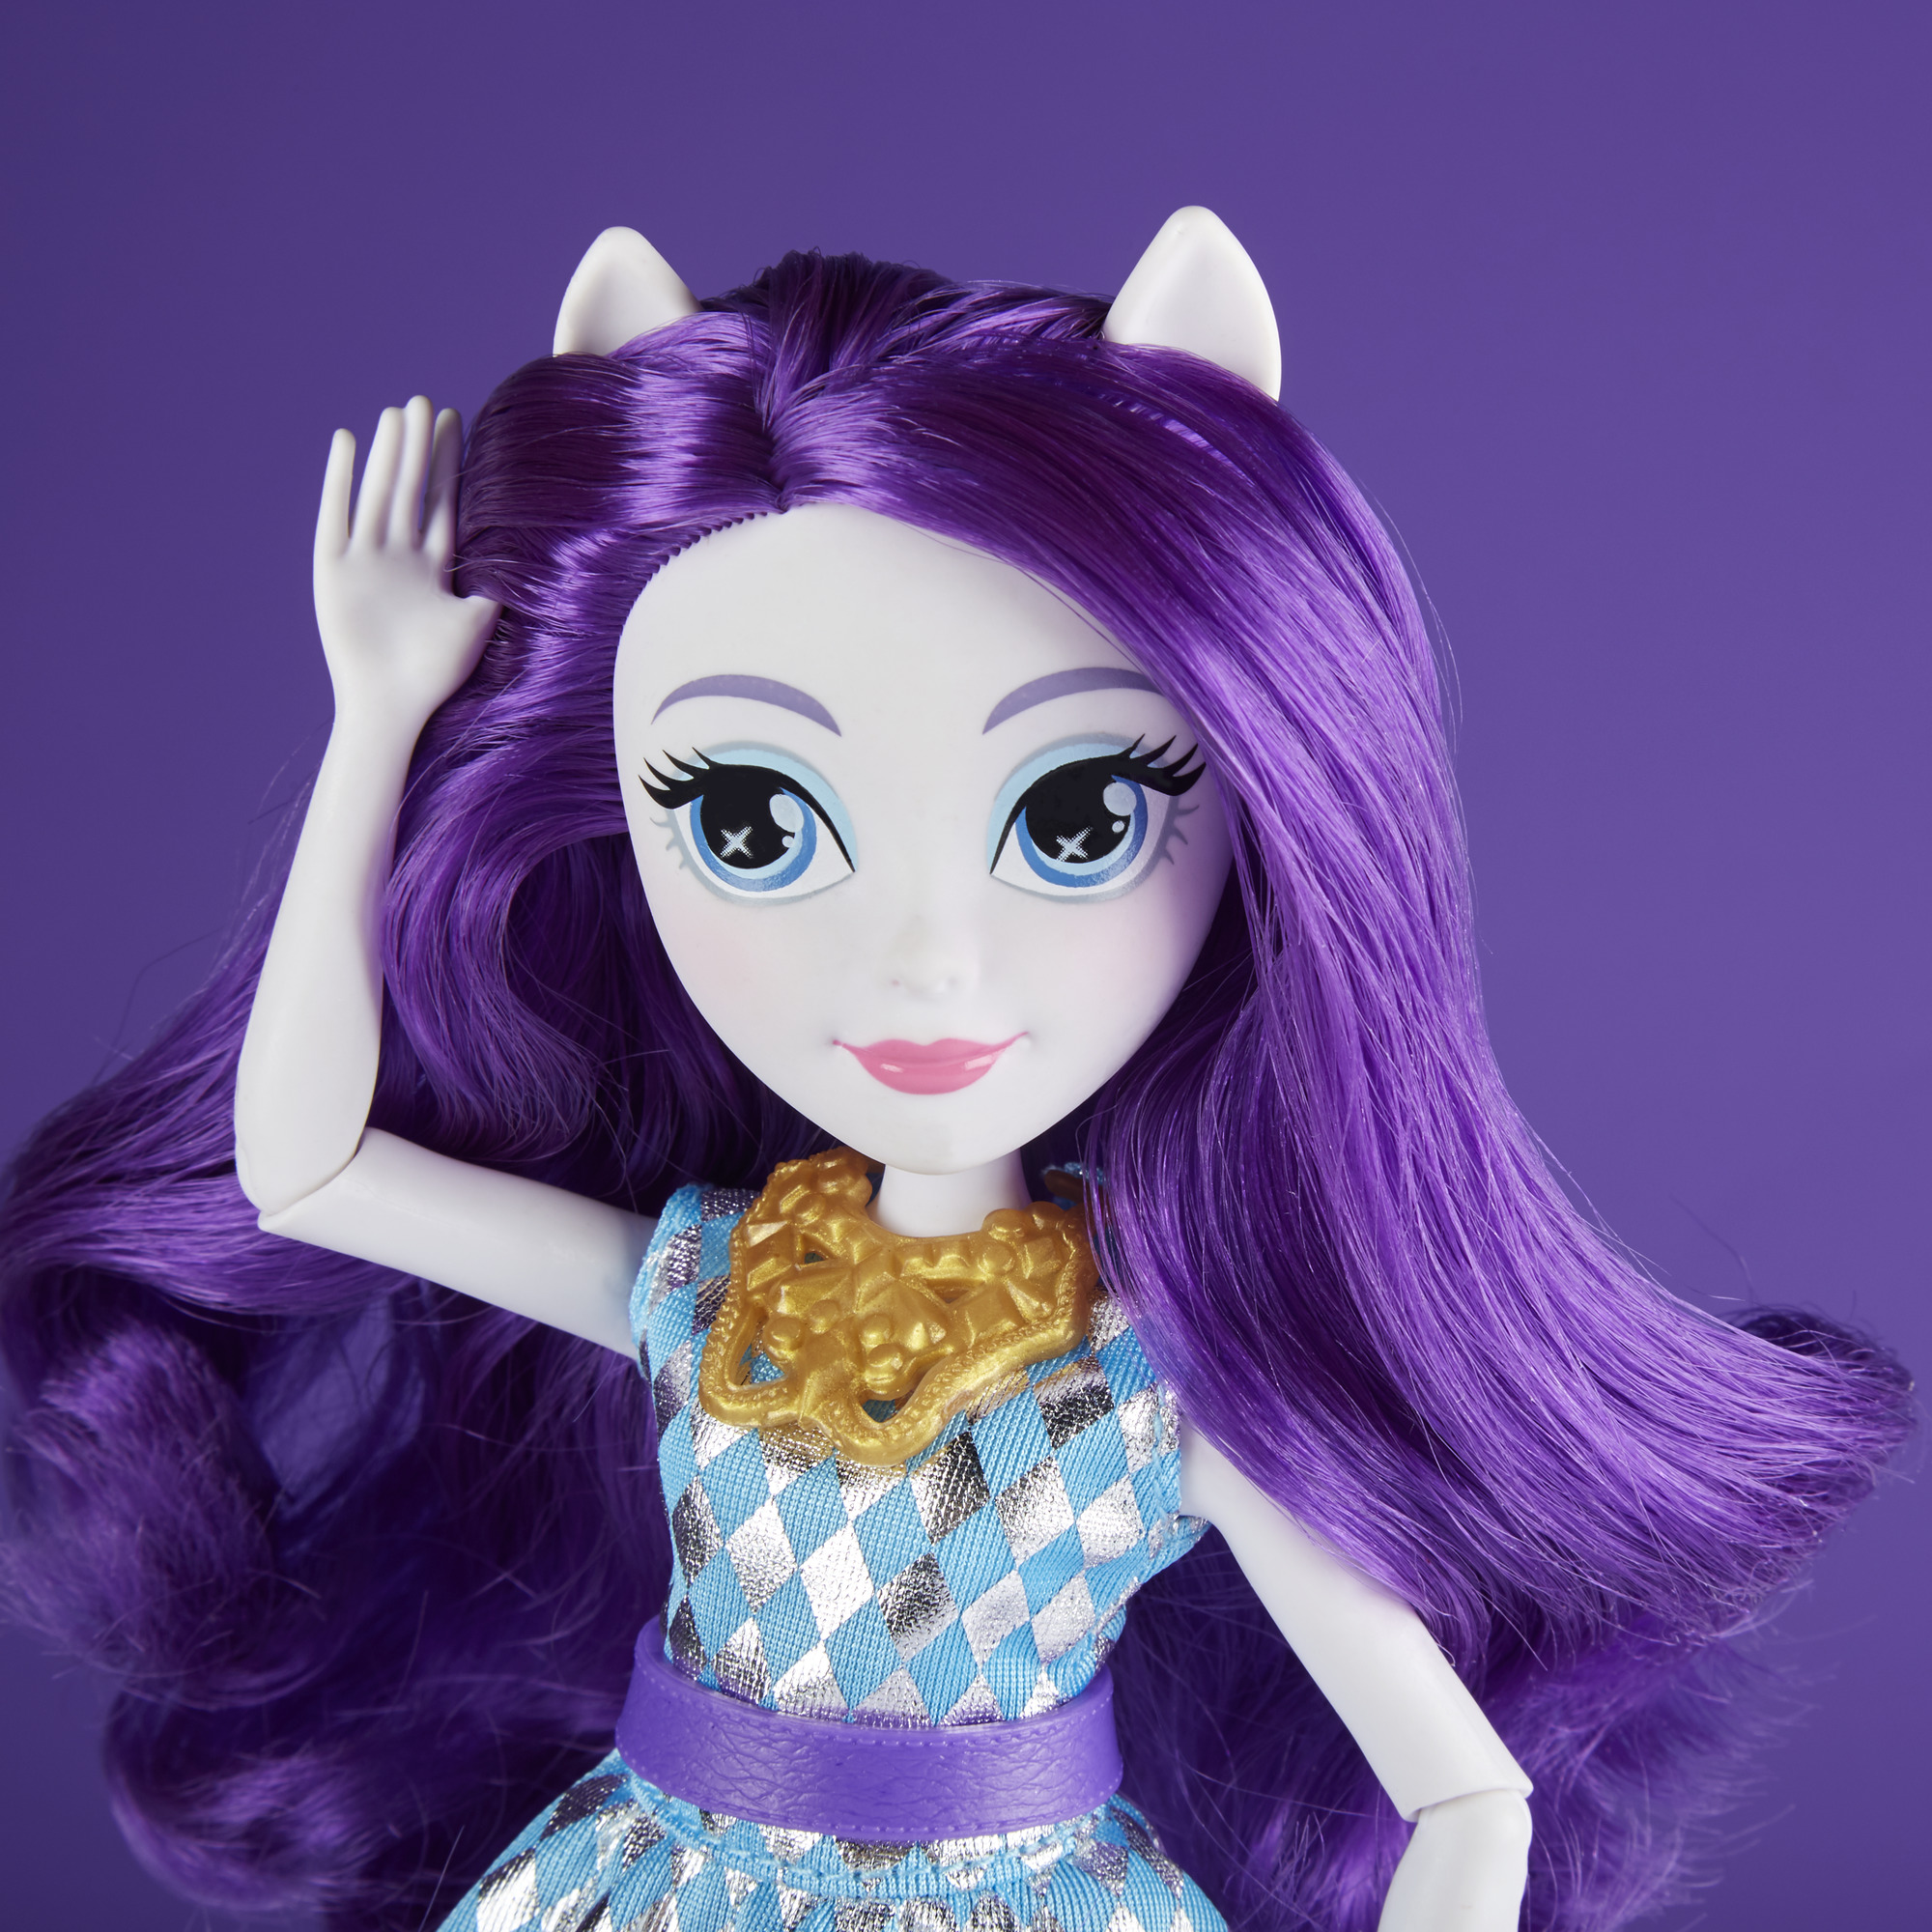 My Little Pony Equestria Girls Rarity Classic Style Doll - image 7 of 9